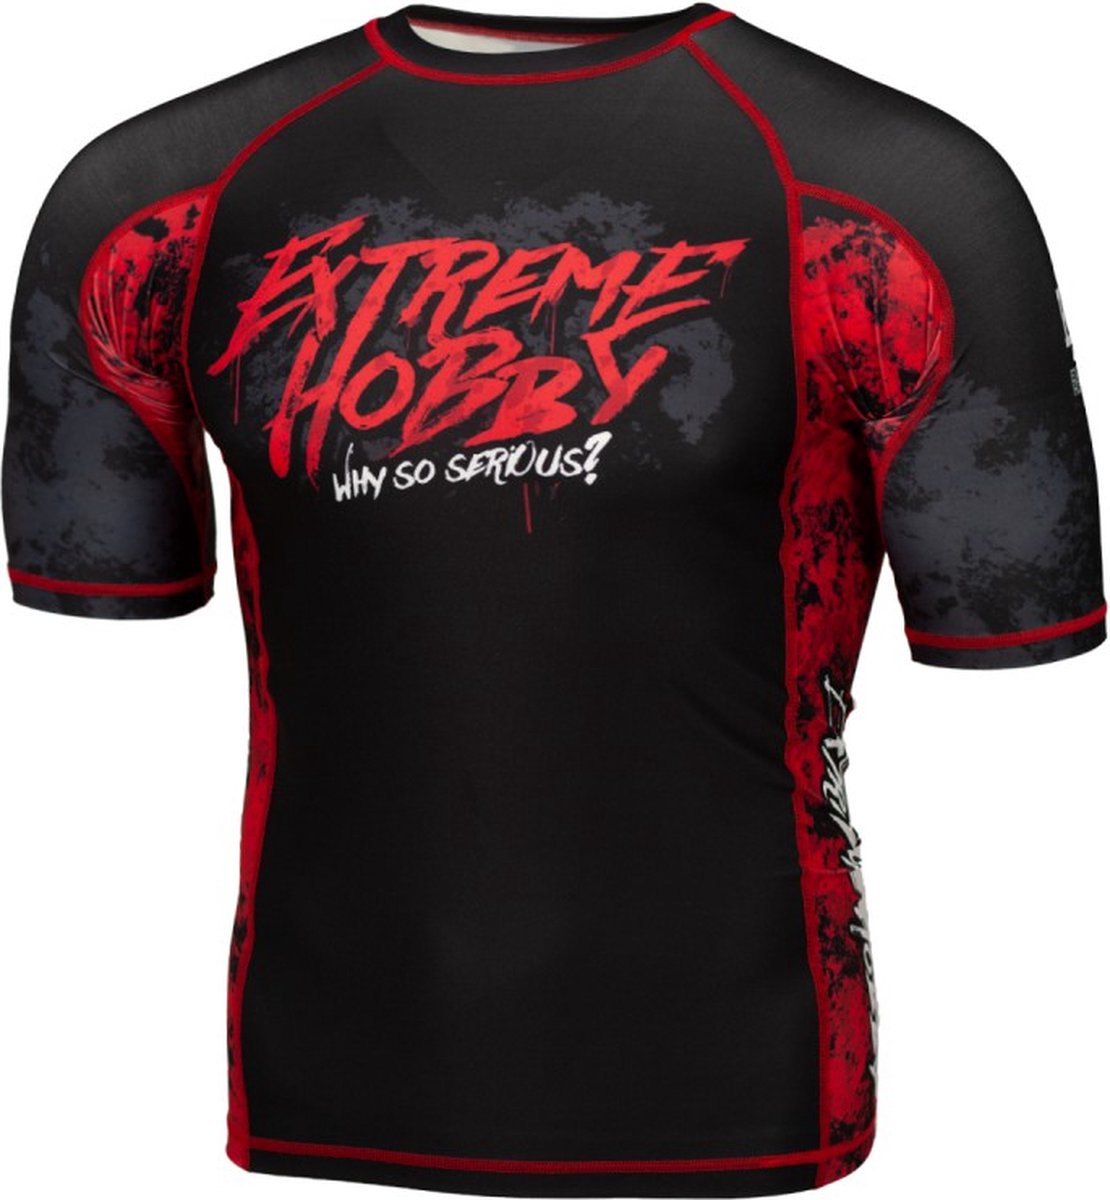 Extreme Hobby - Why So Serious - Rashguard Short Sleeve - Compression Shirt - Zwaart, Rood - Maat L